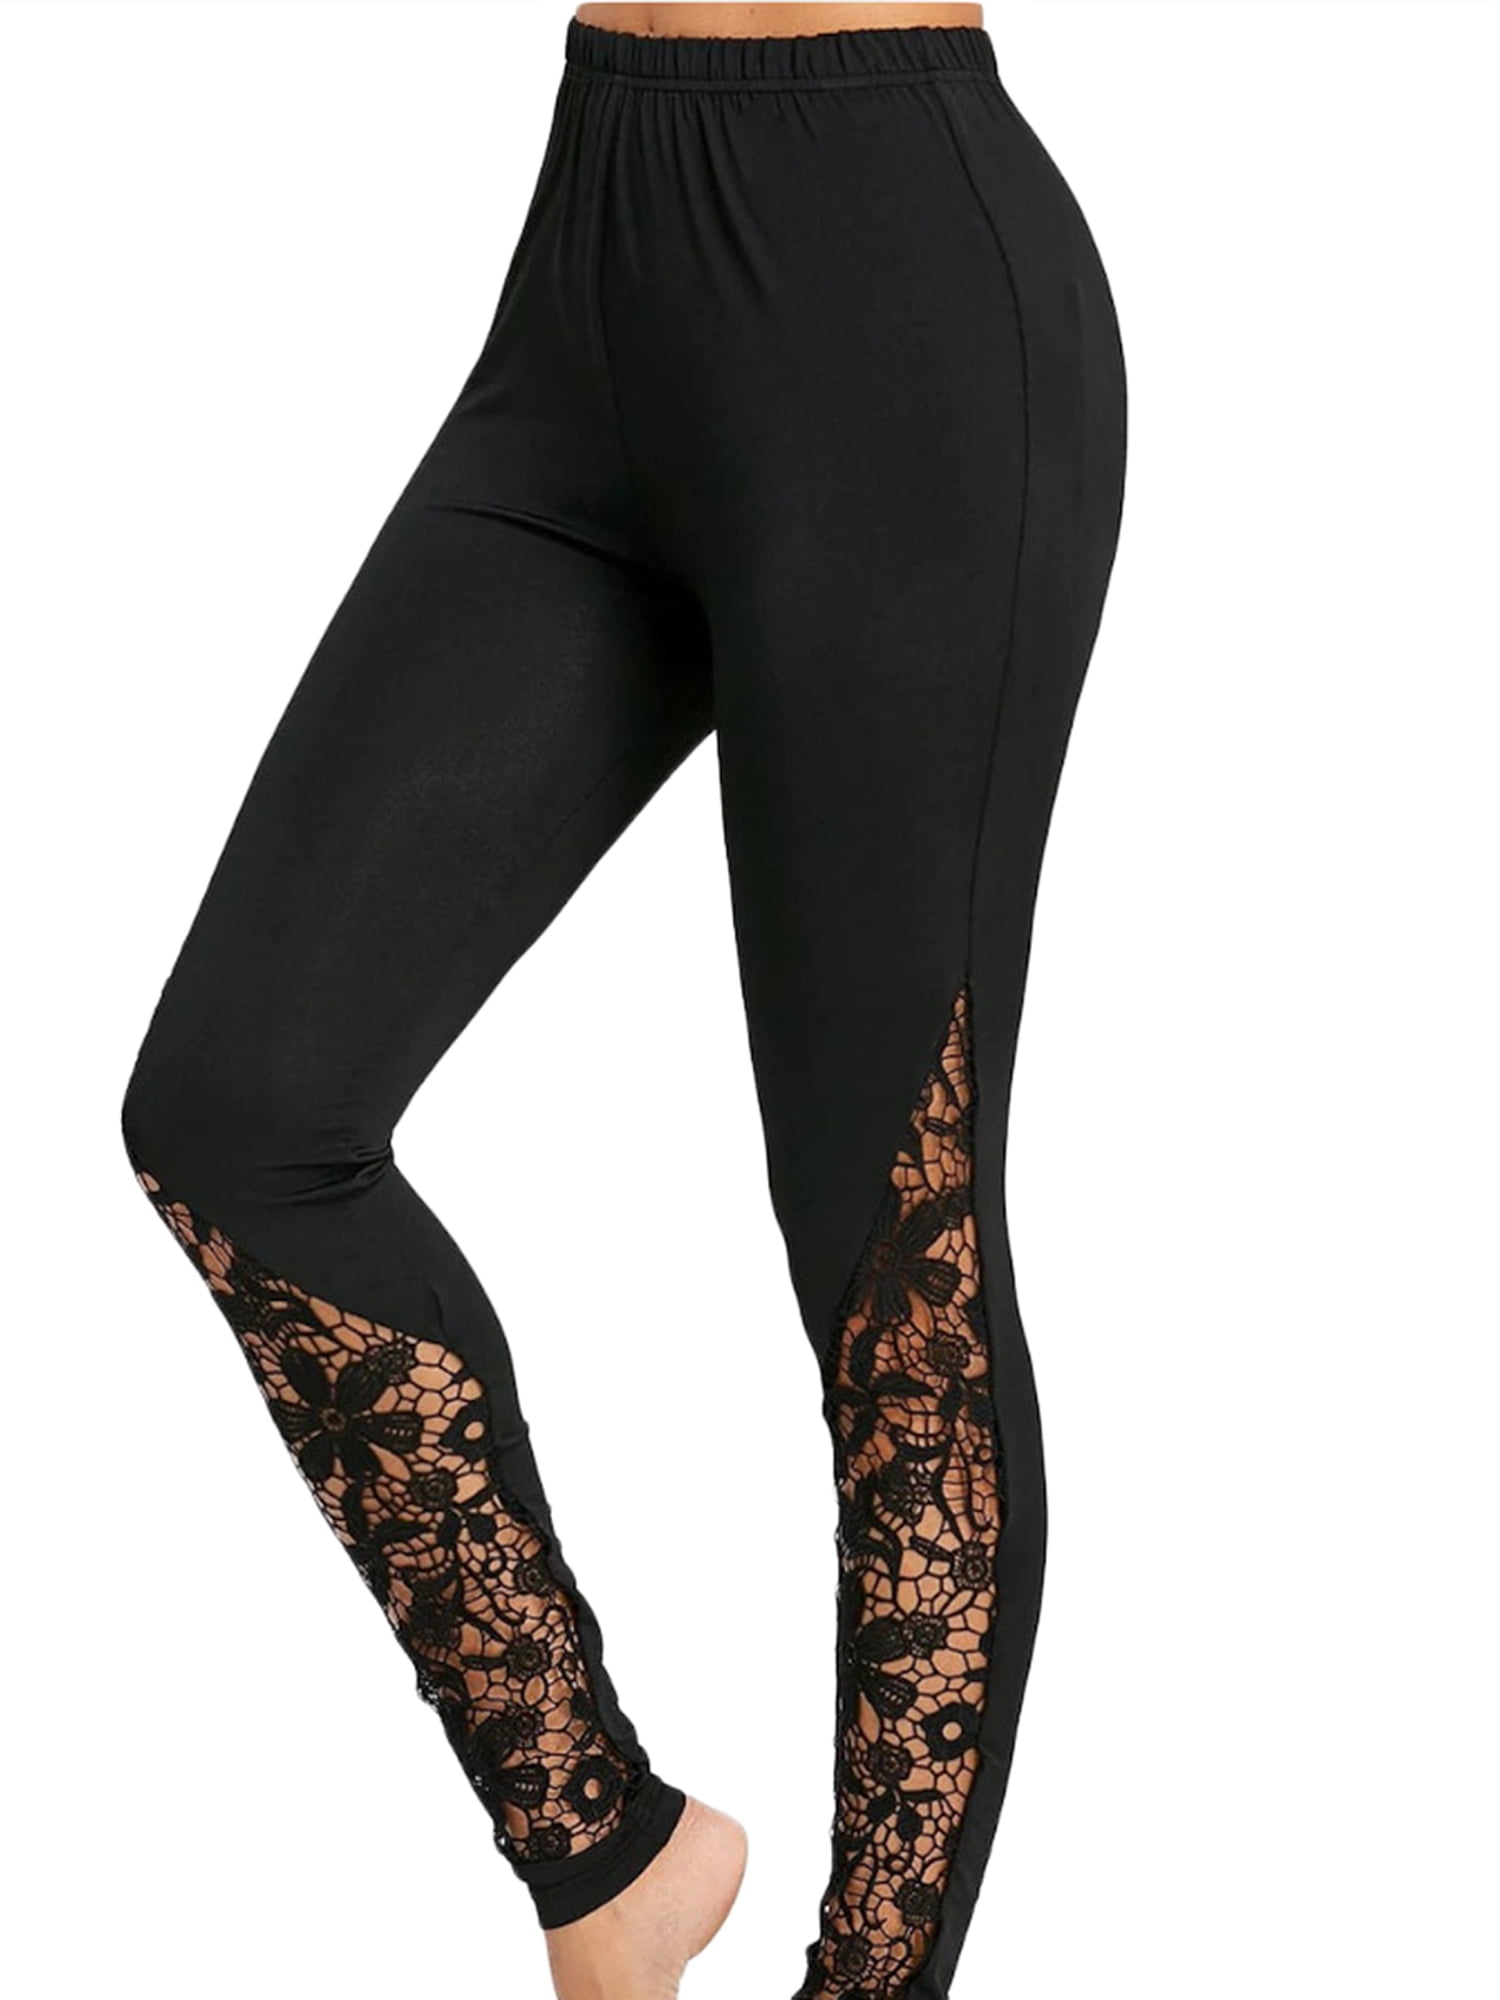 Women's Sheer Mesh Lace Hollow Leggings Stretchy High Waist Casual